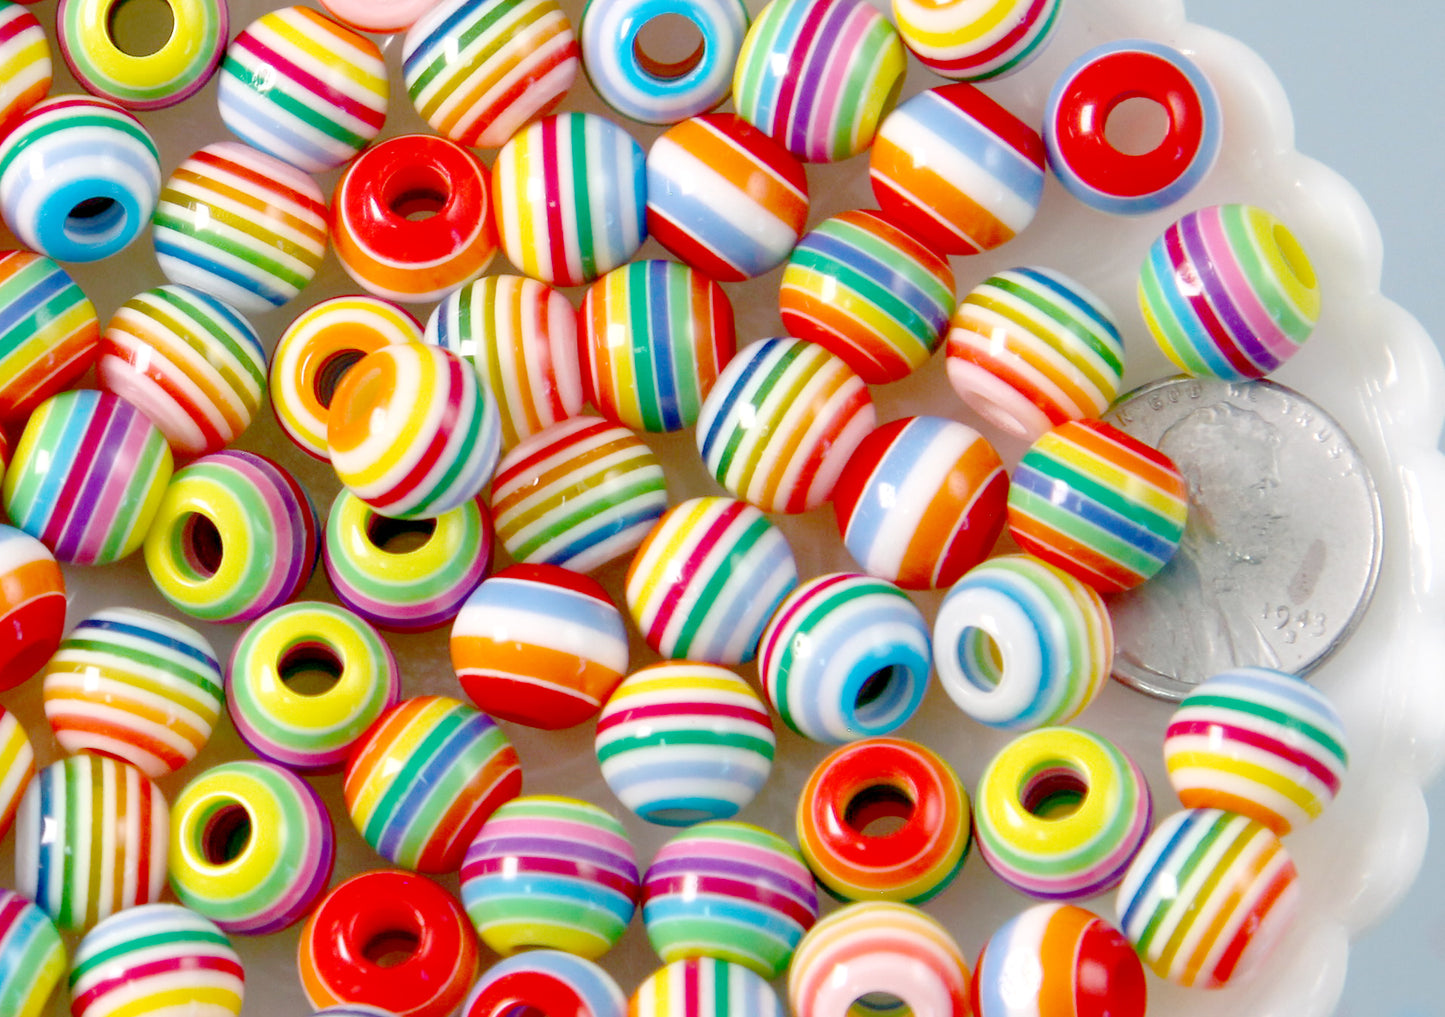 Striped Resin Beads - 10mm Large Hole Small Striped Resin or Acrylic Beads, mixed color, small size beads - 100 pc set